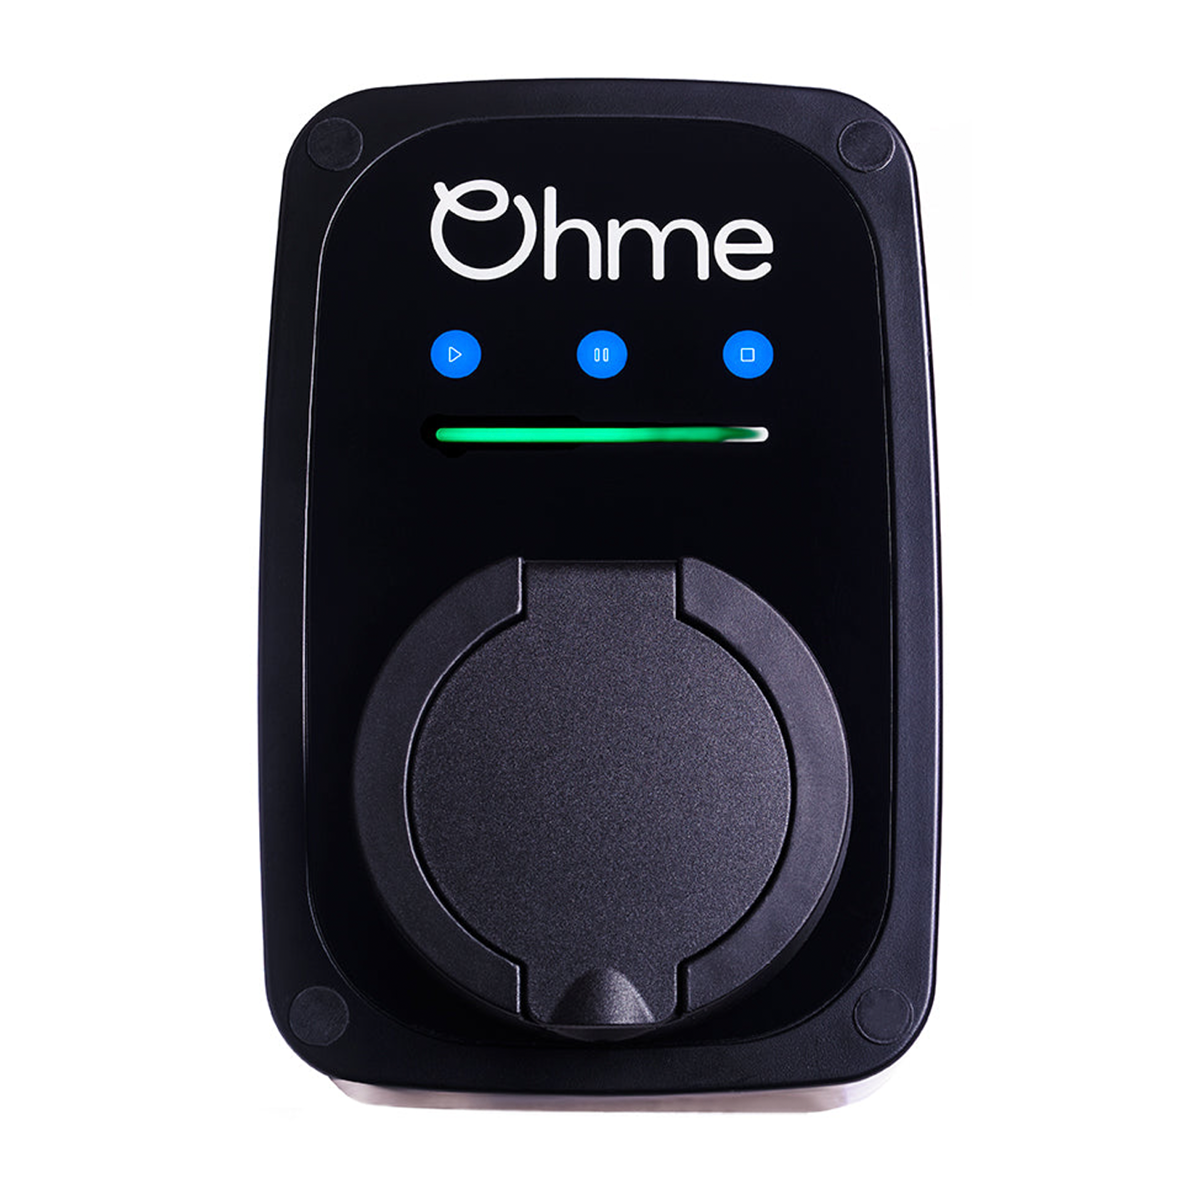 Ohme Home Pro at internet only prices from Charge-M8